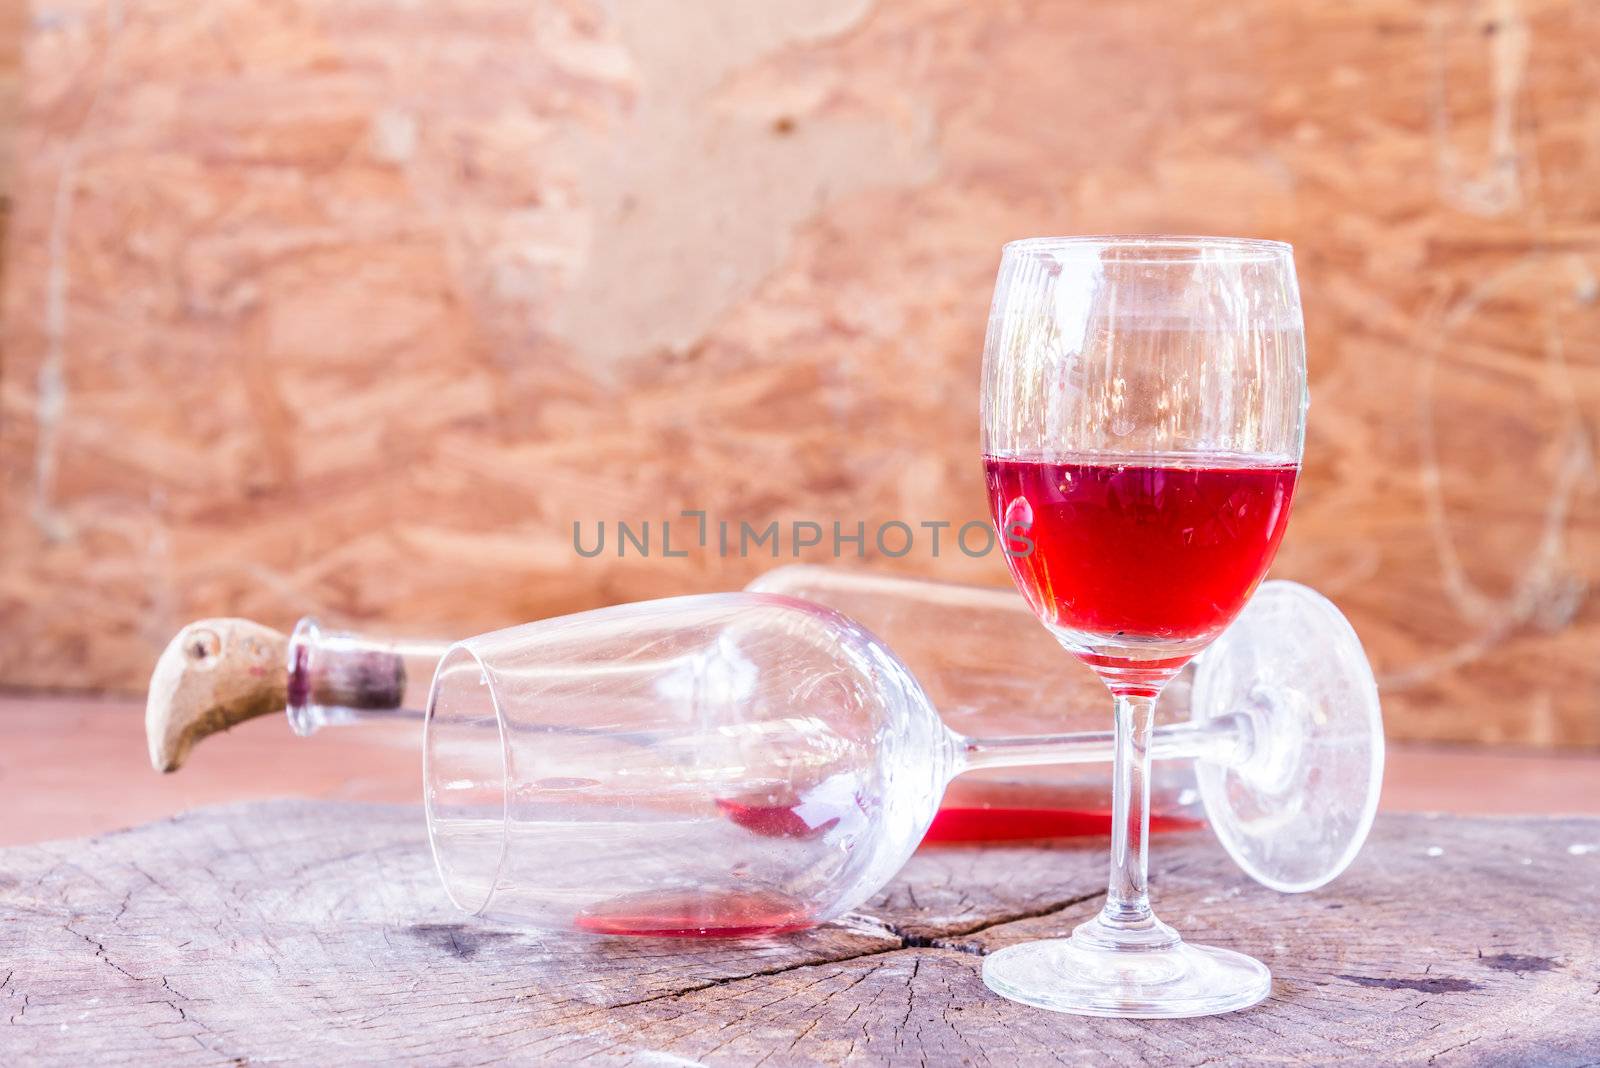 red wine on wooden background still life image